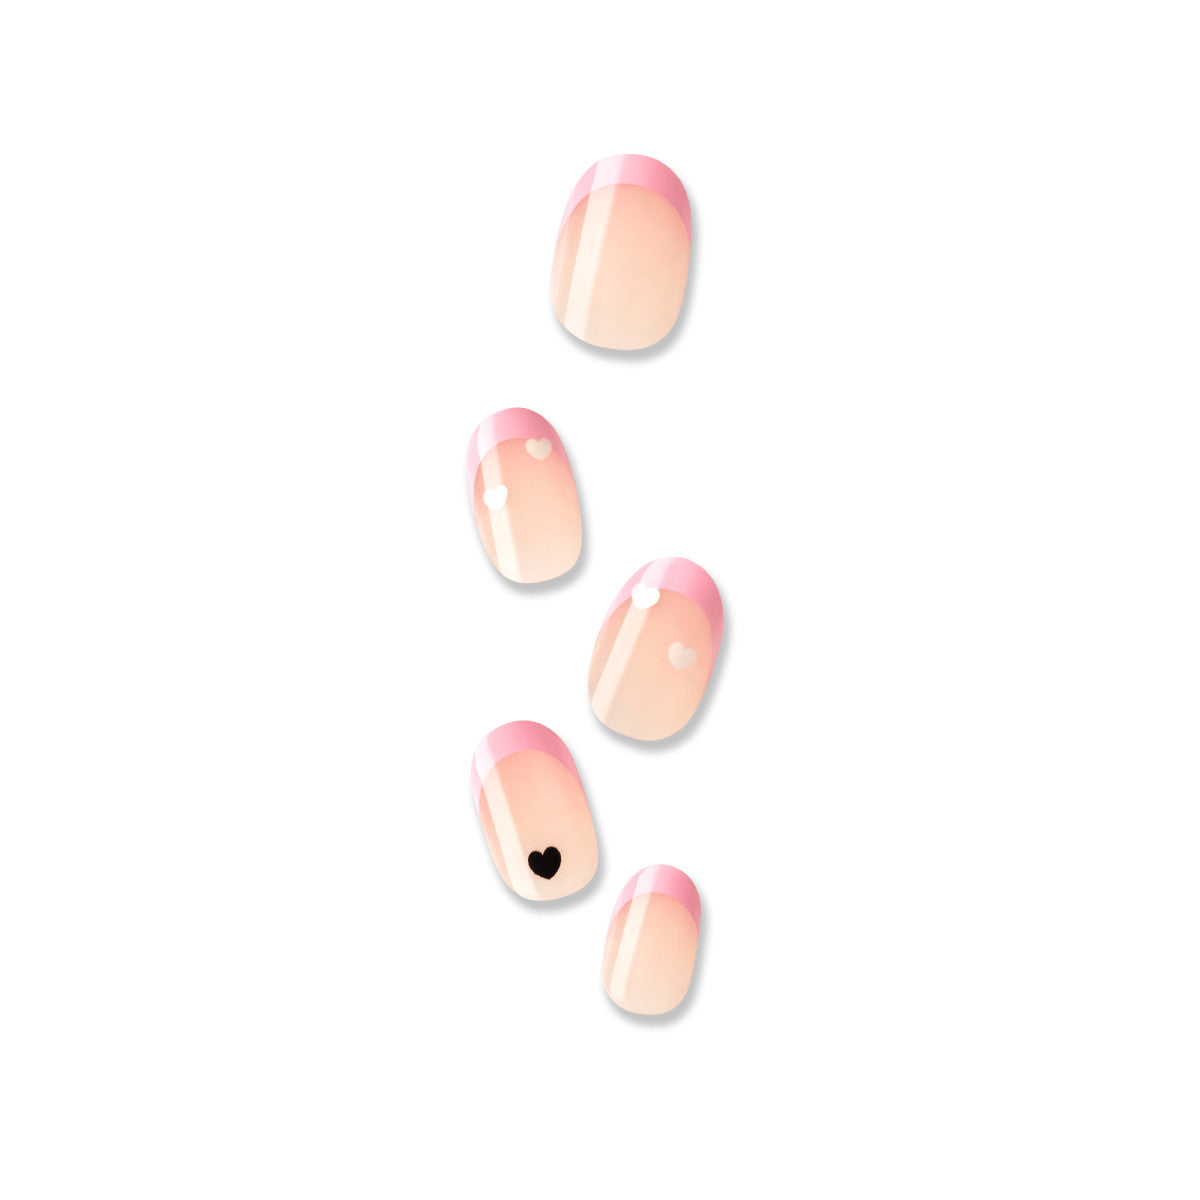 KISS imPRESS No Glue Mani Press On Nails, French, Ditto, Pink, Short Oval, 30ct